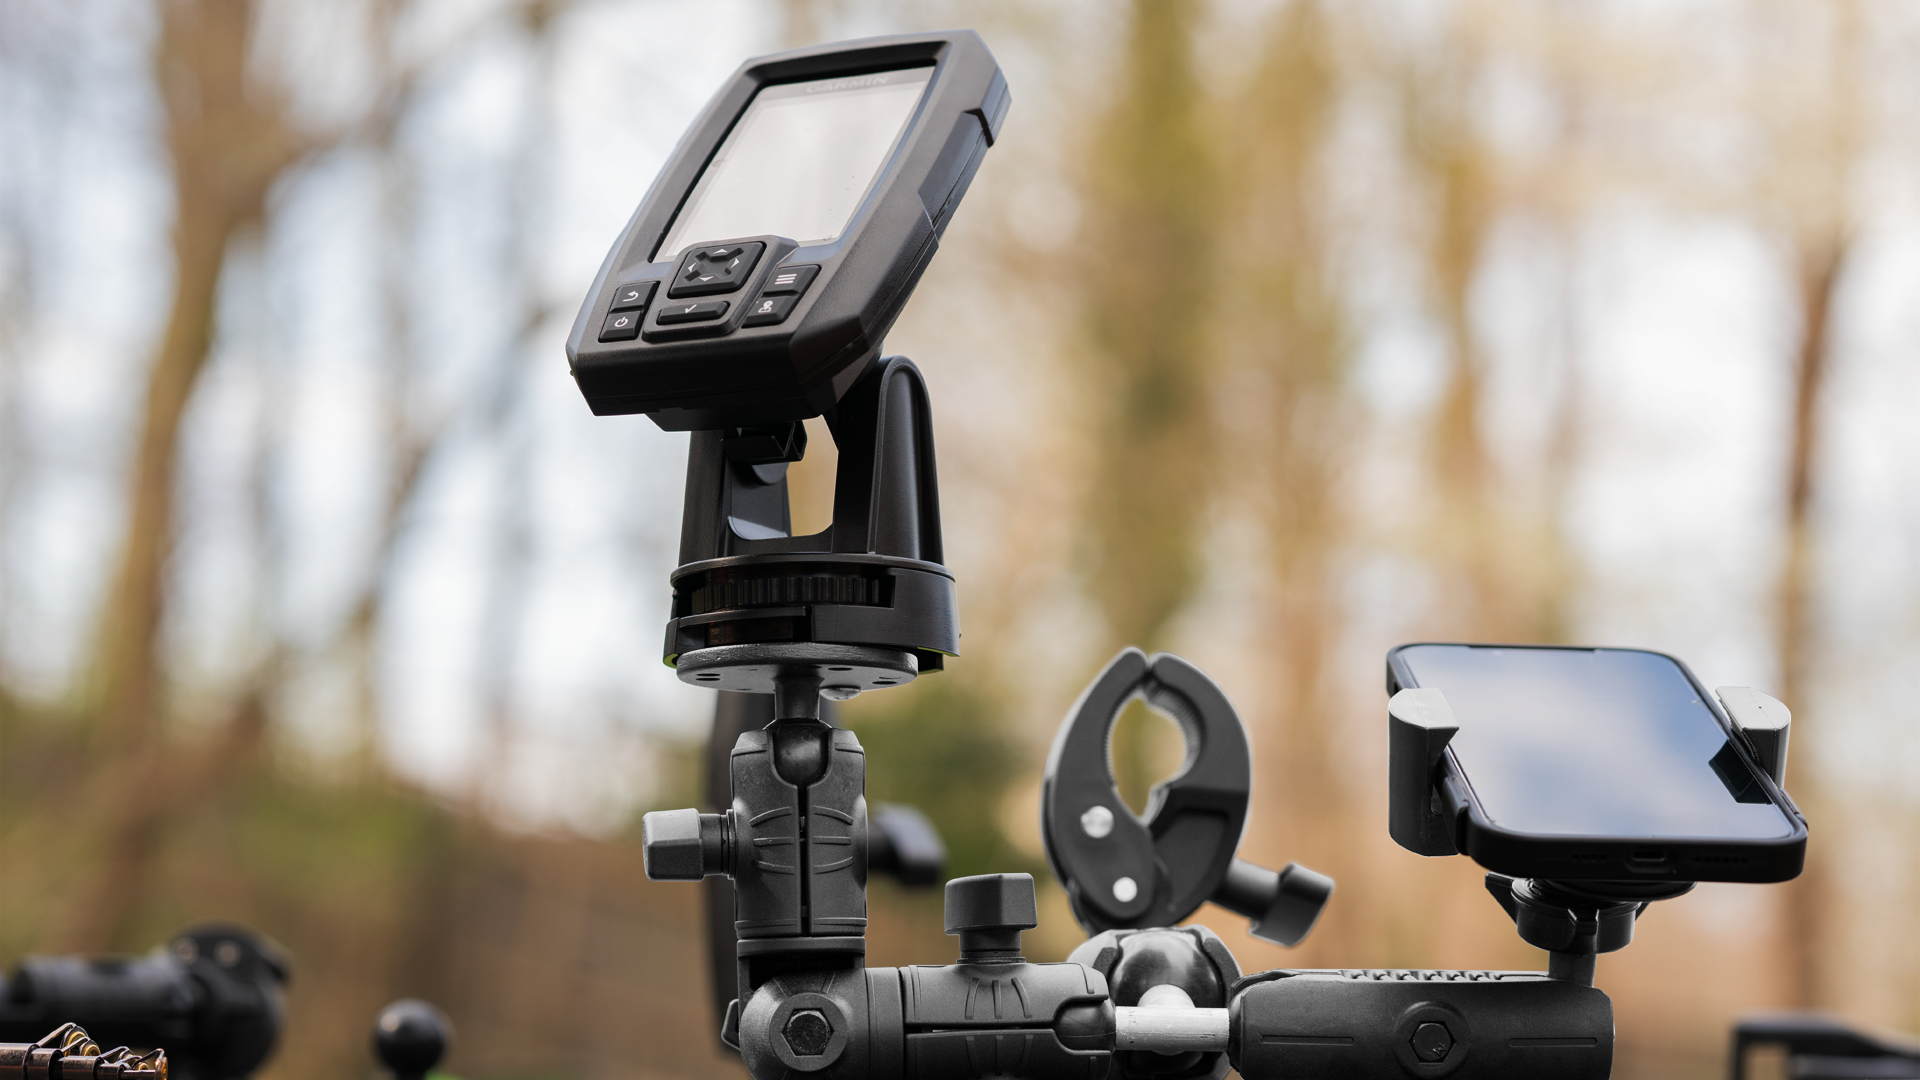 HOW TO MOUNT A FISH FINDER TO YOUR BOAT USING IBOLT MOUNTS